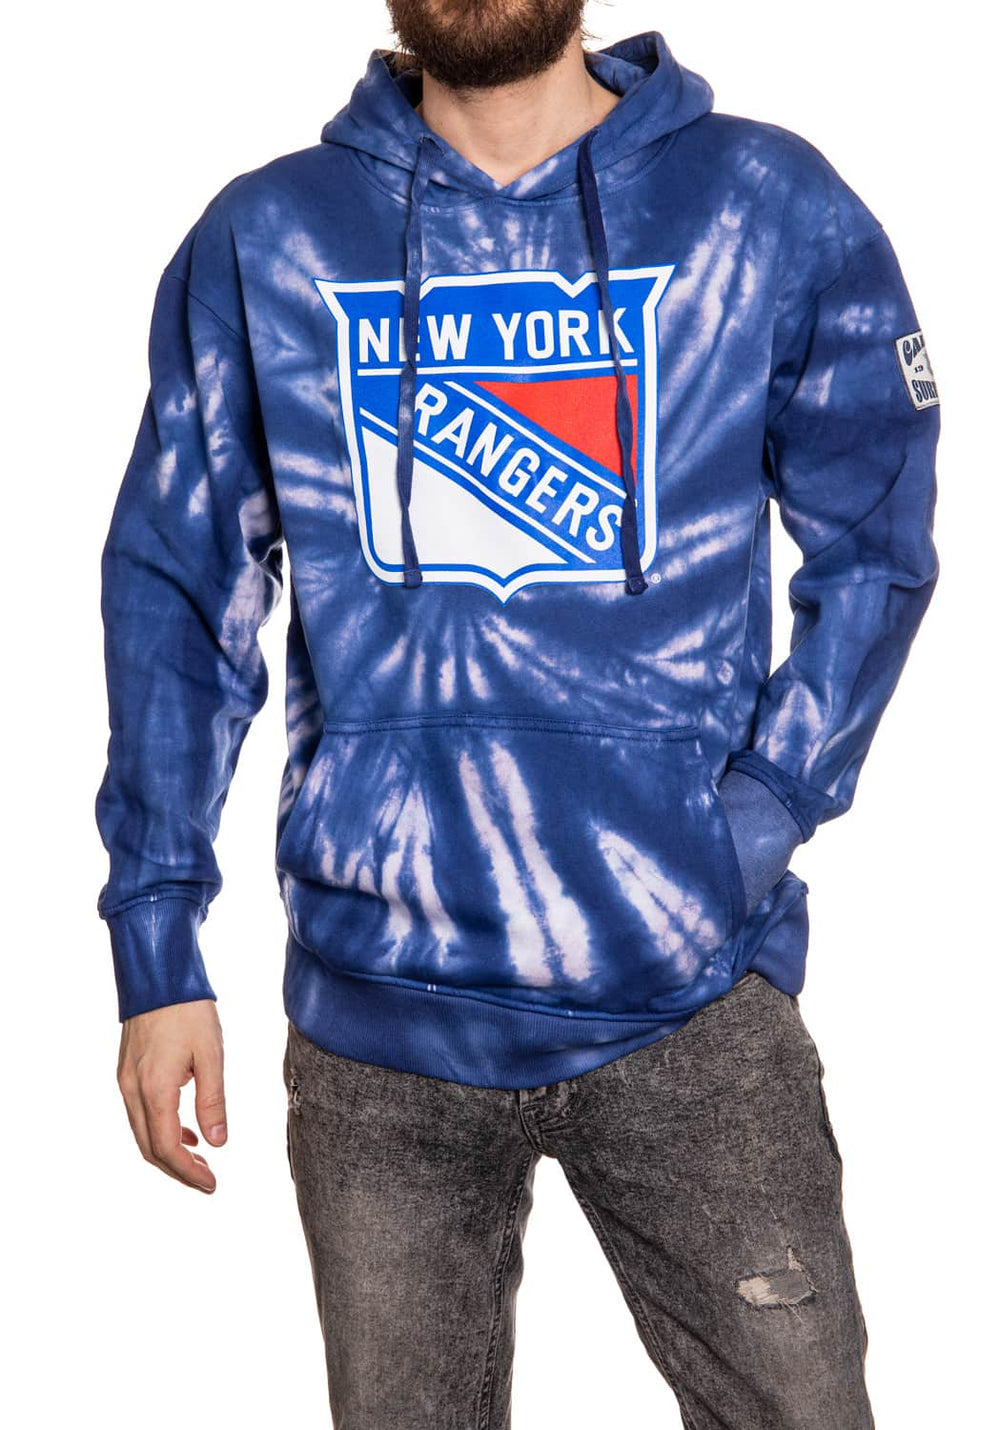 New York Rangers Spiral Tie Dye Pullover Hoodie in Blue Front View